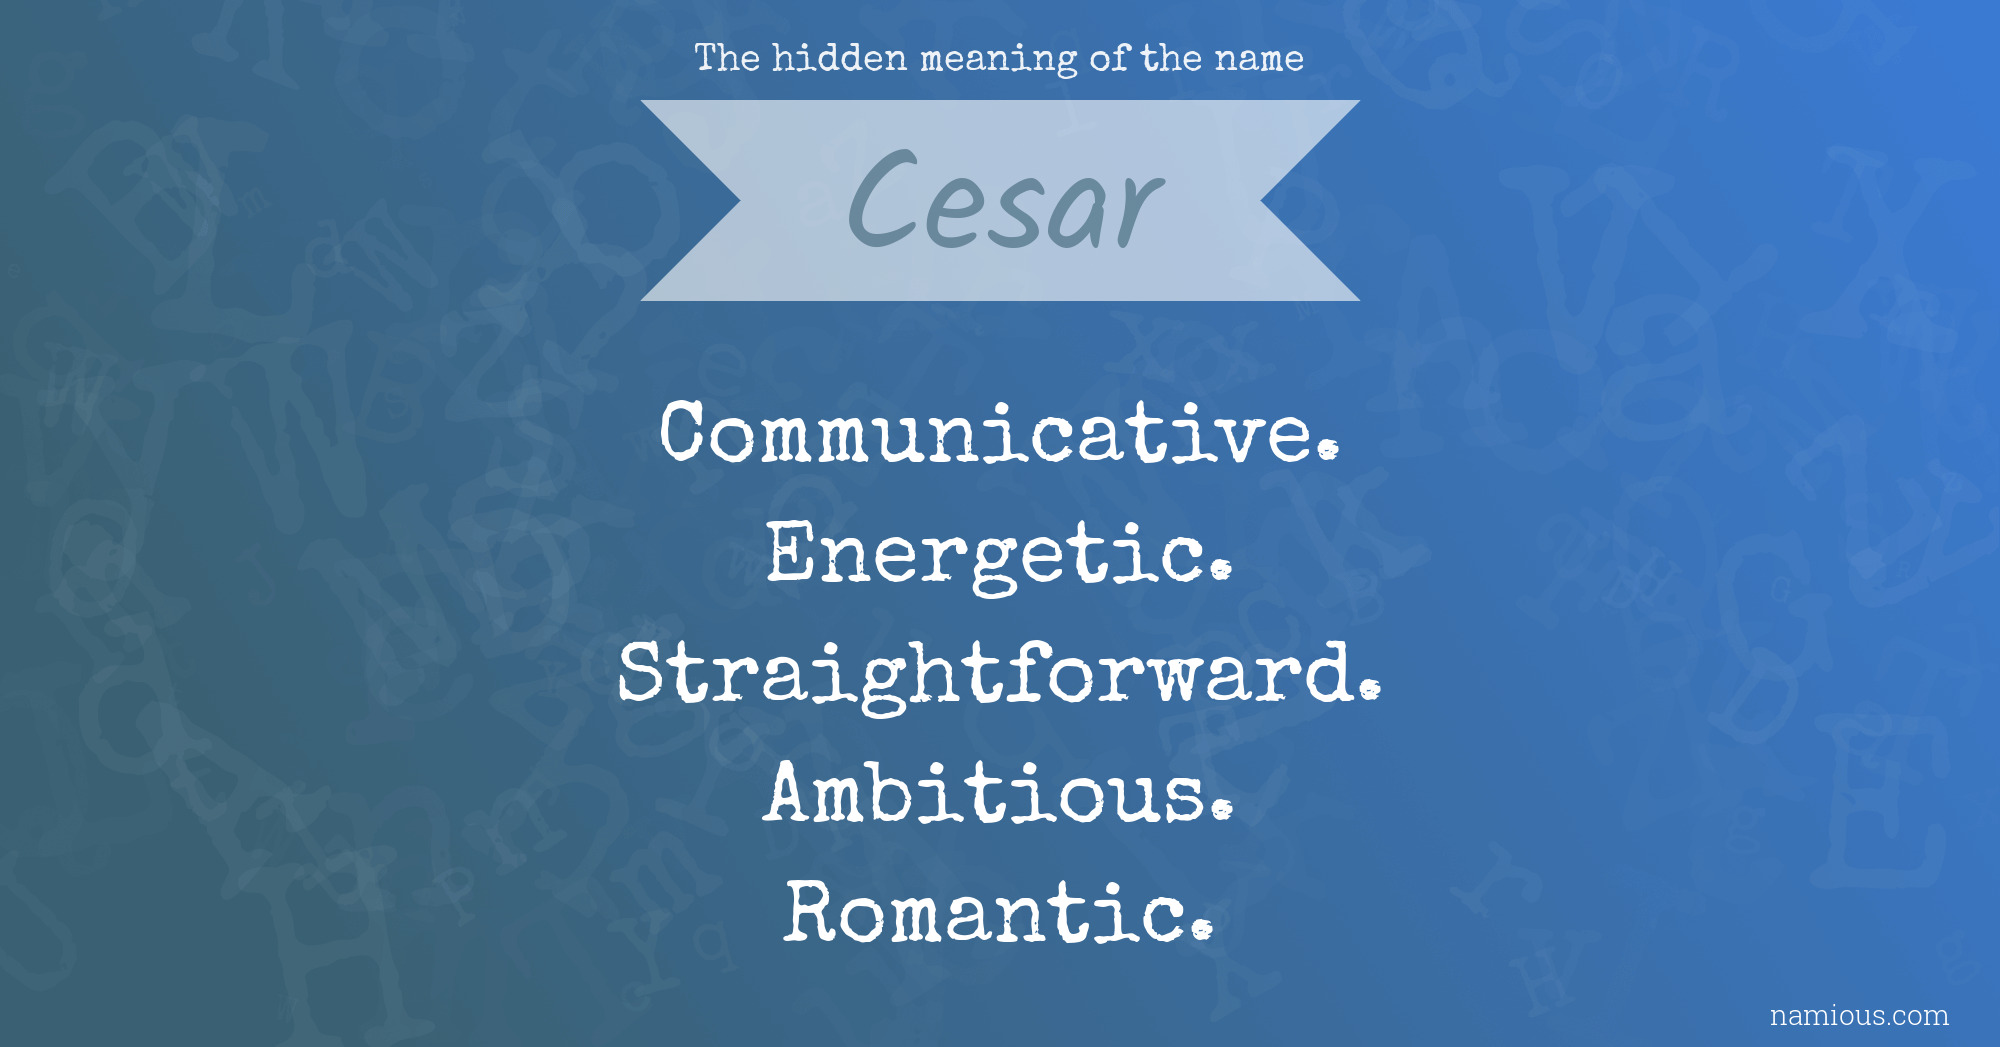 The hidden meaning of the name Cesar